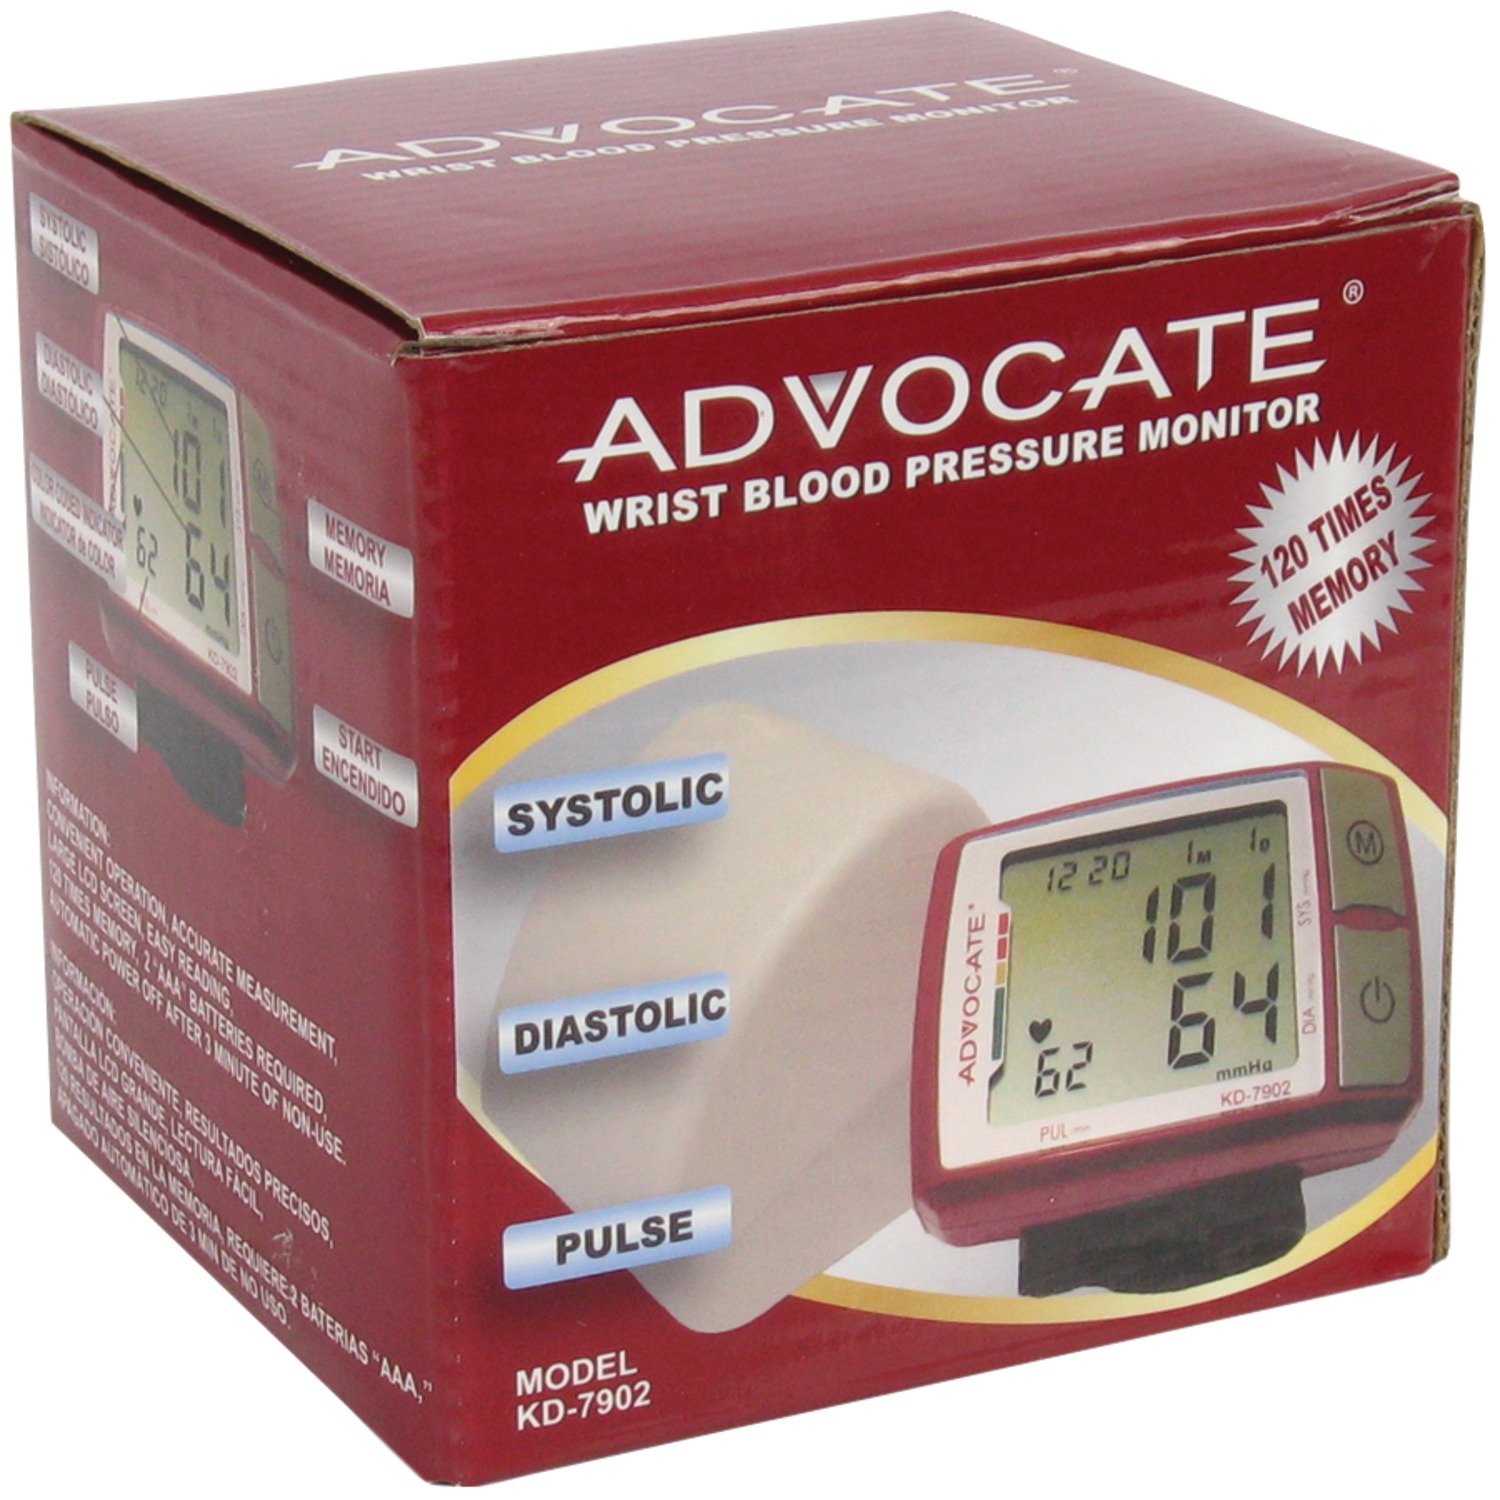 ADVOCATE KD-7902 Wrist Blood Pressure Monitor with Color Indicator - image 4 of 4